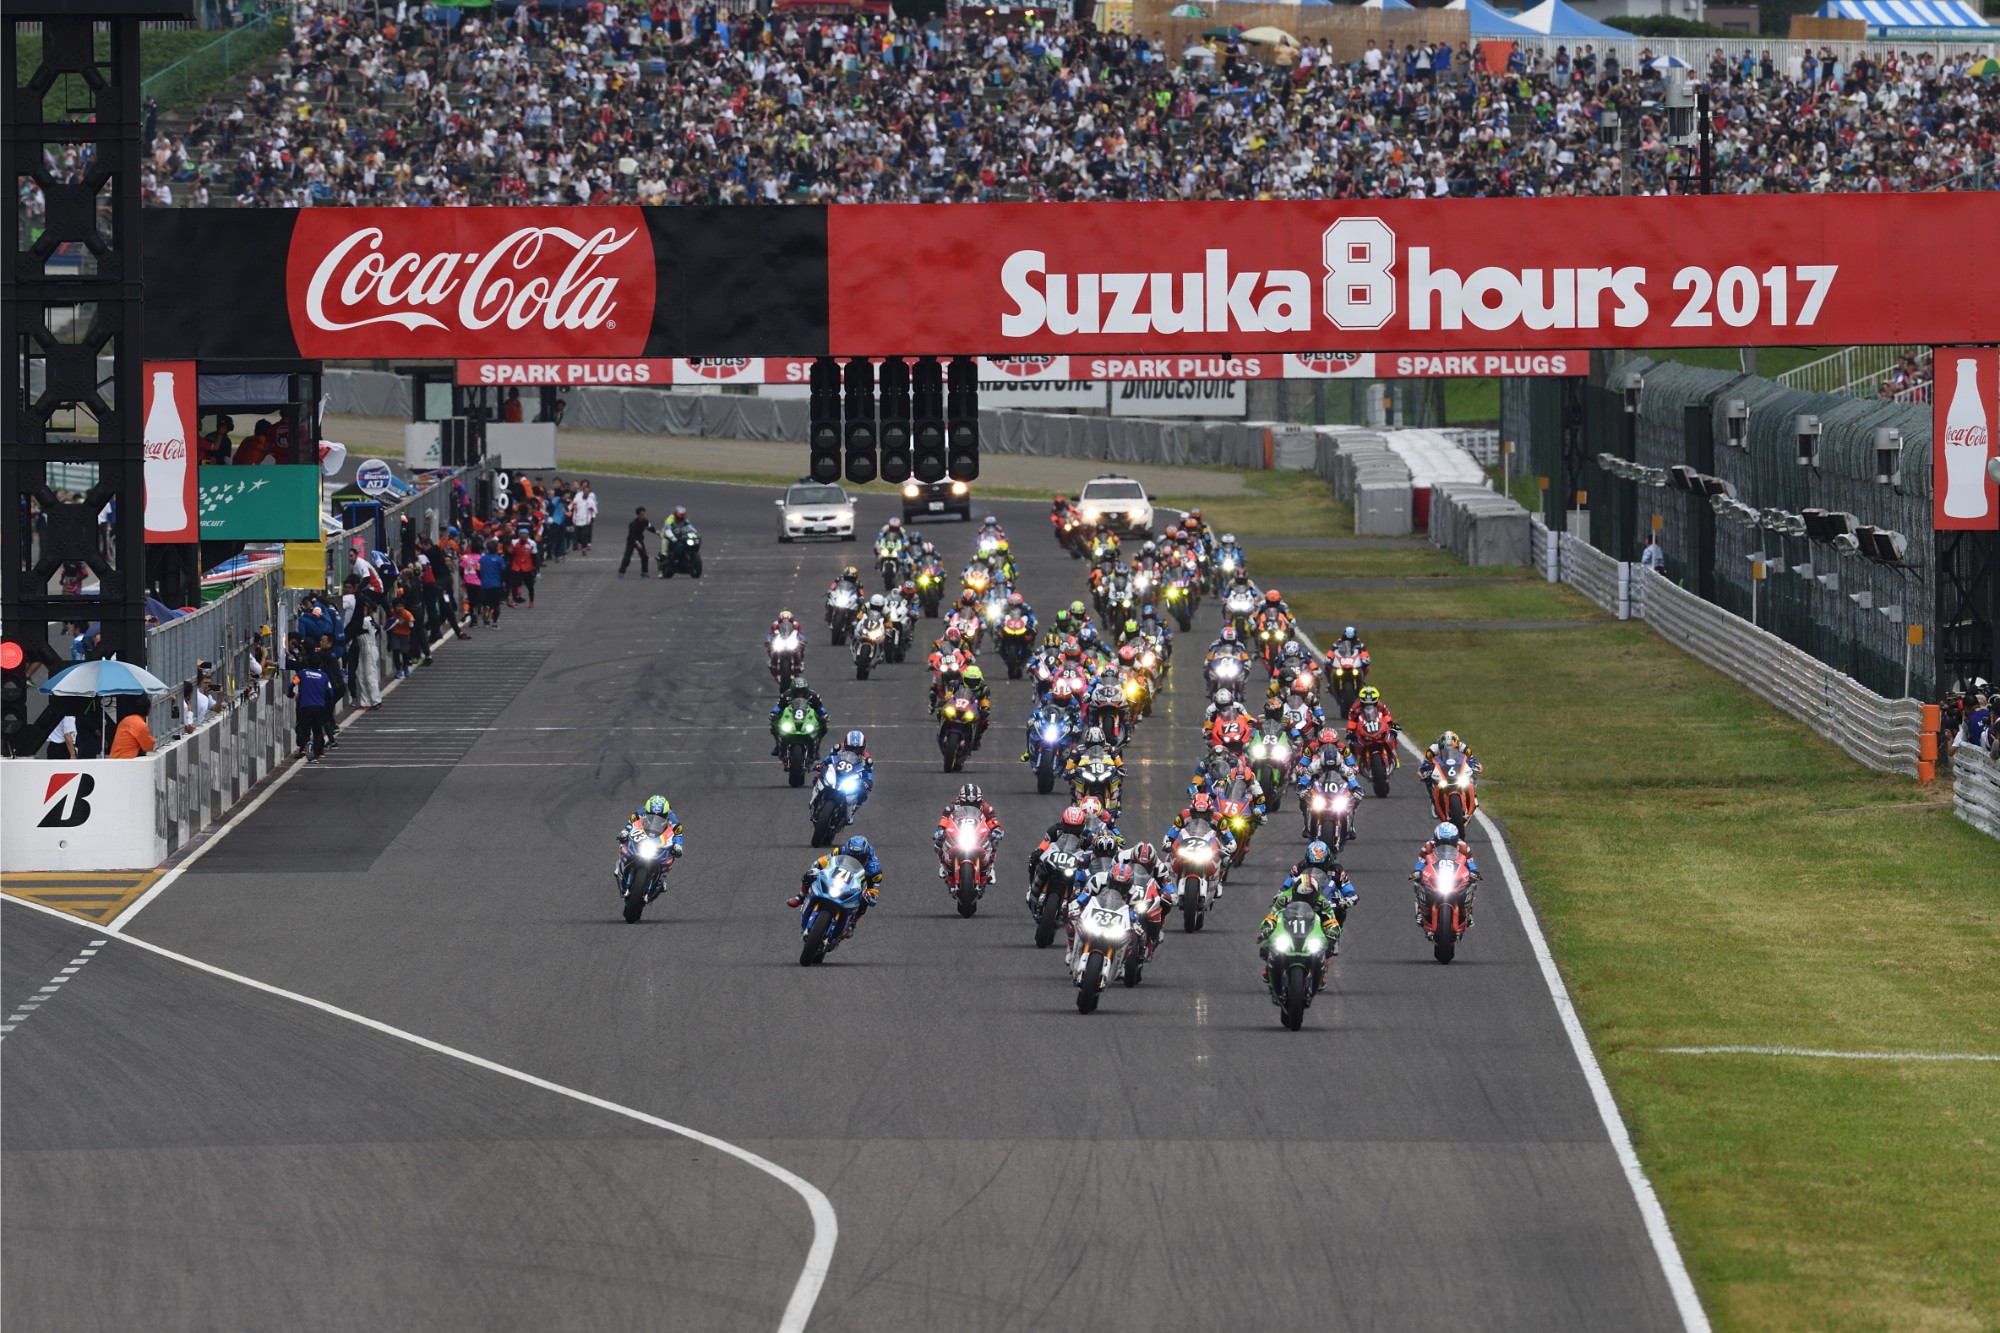 World Endurance How To Watch The Suzuka 8 Hours Race This Coming Weekend Roadracing World Magazine Motorcycle Riding Racing Tech News